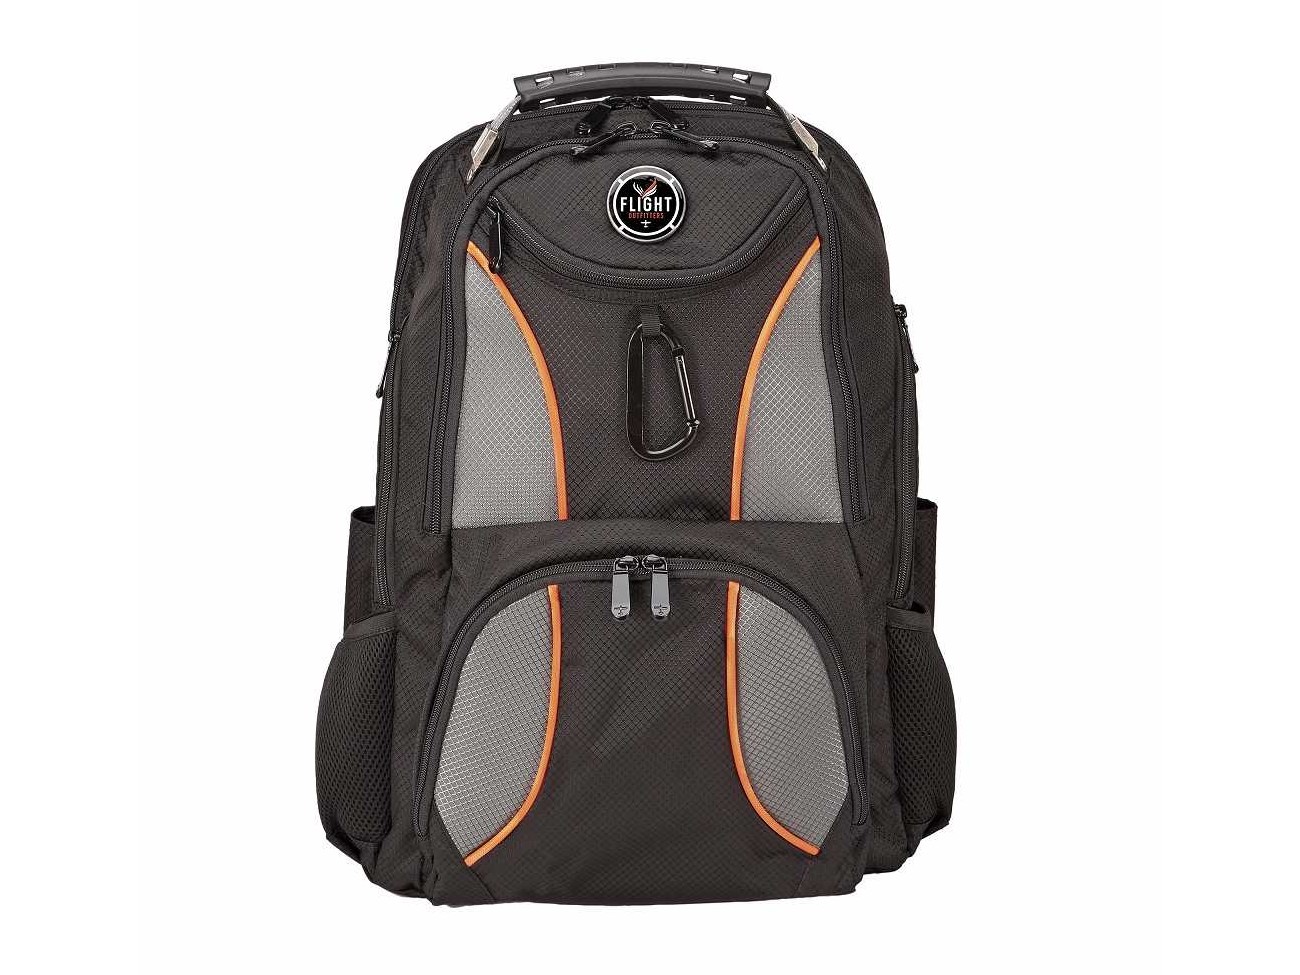 【Flight Outfitters】 Waypoint Backpack （バックパック リュック）